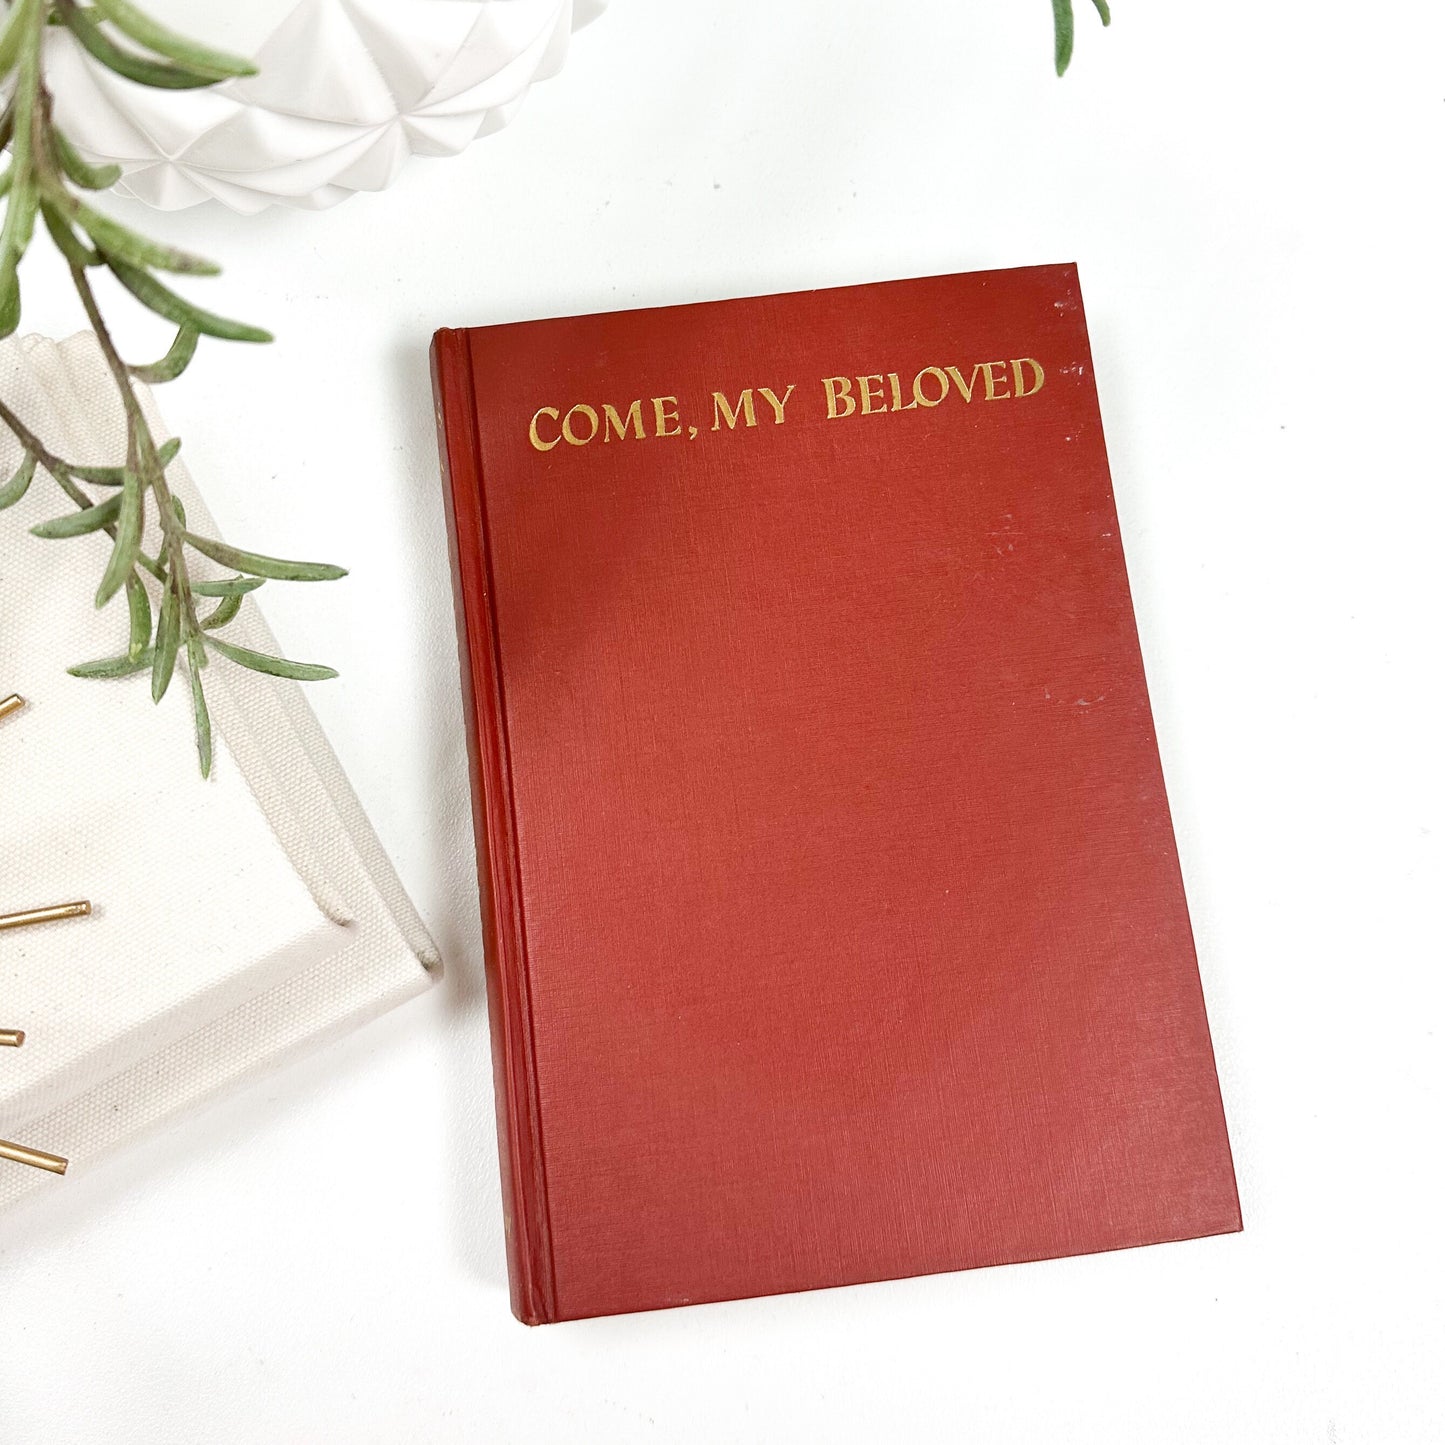 Come, My Beloved by Pearl S. Buck